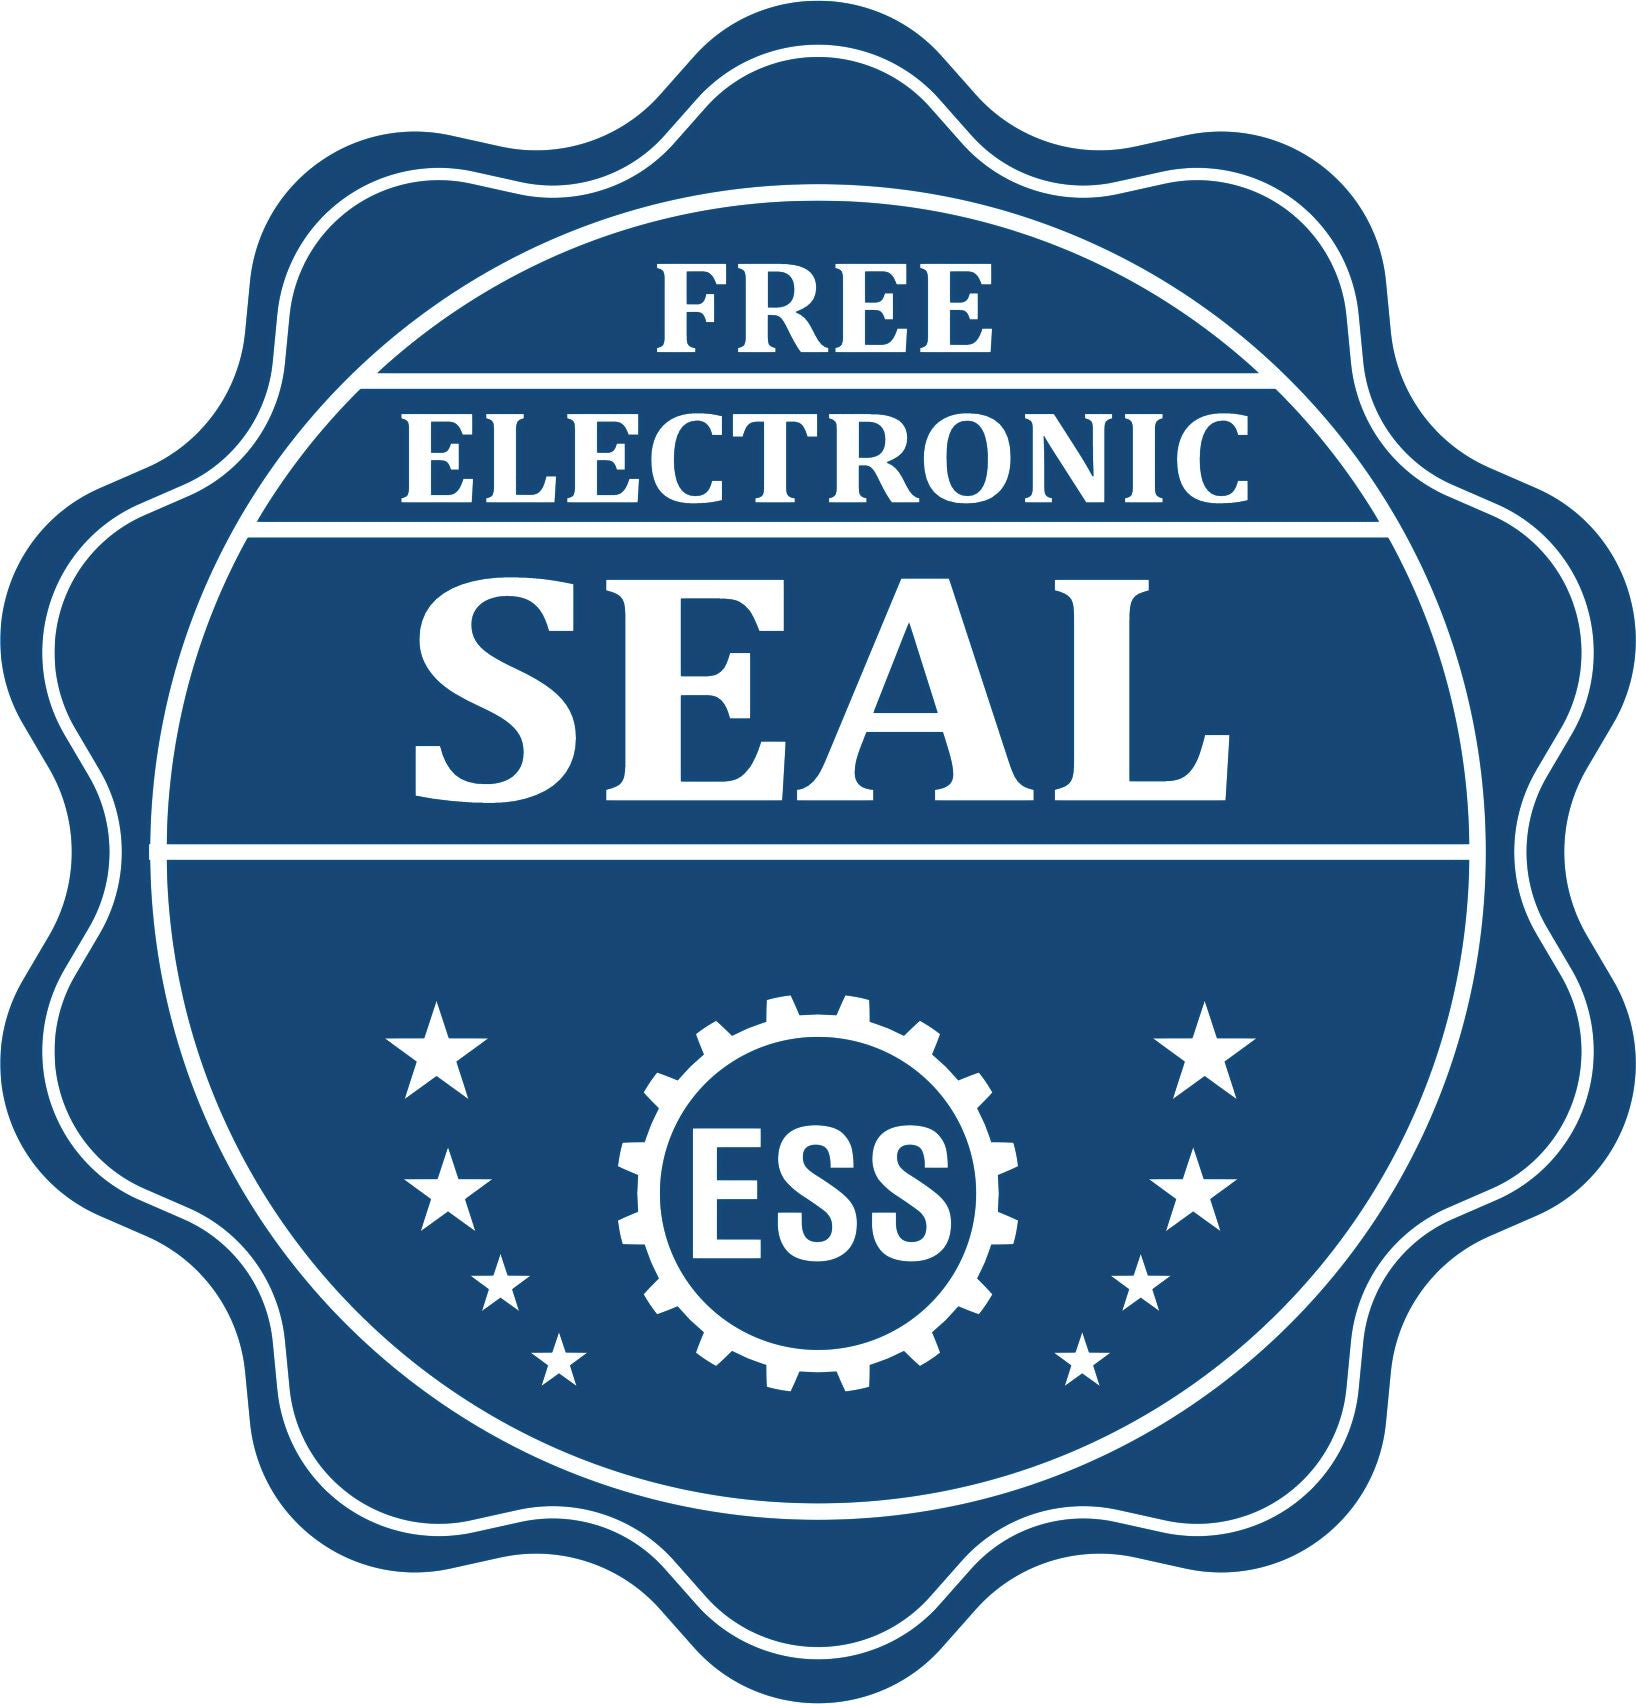 A badge showing a free electronic seal for the Slim Pre-Inked Oklahoma Landscape Architect Seal Stamp with stars and the ESS gear on the emblem.